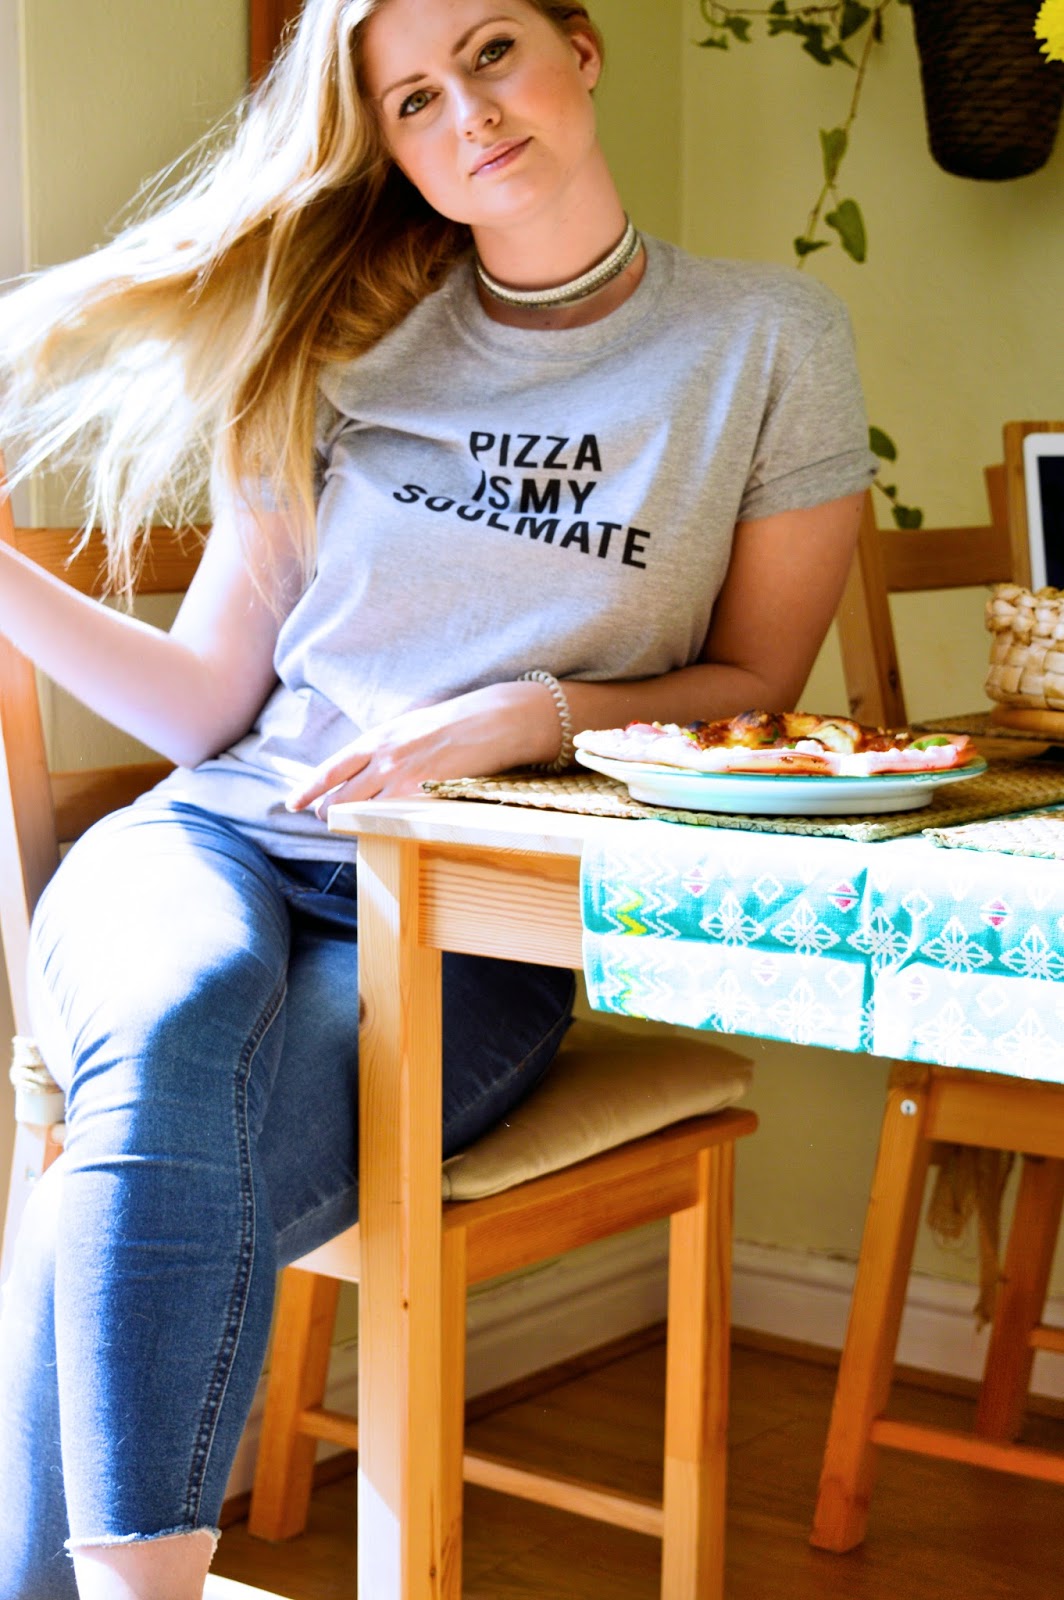 Pizza Is My Soulmate t-shirt, fashion bloggers, Dalry Rose blog